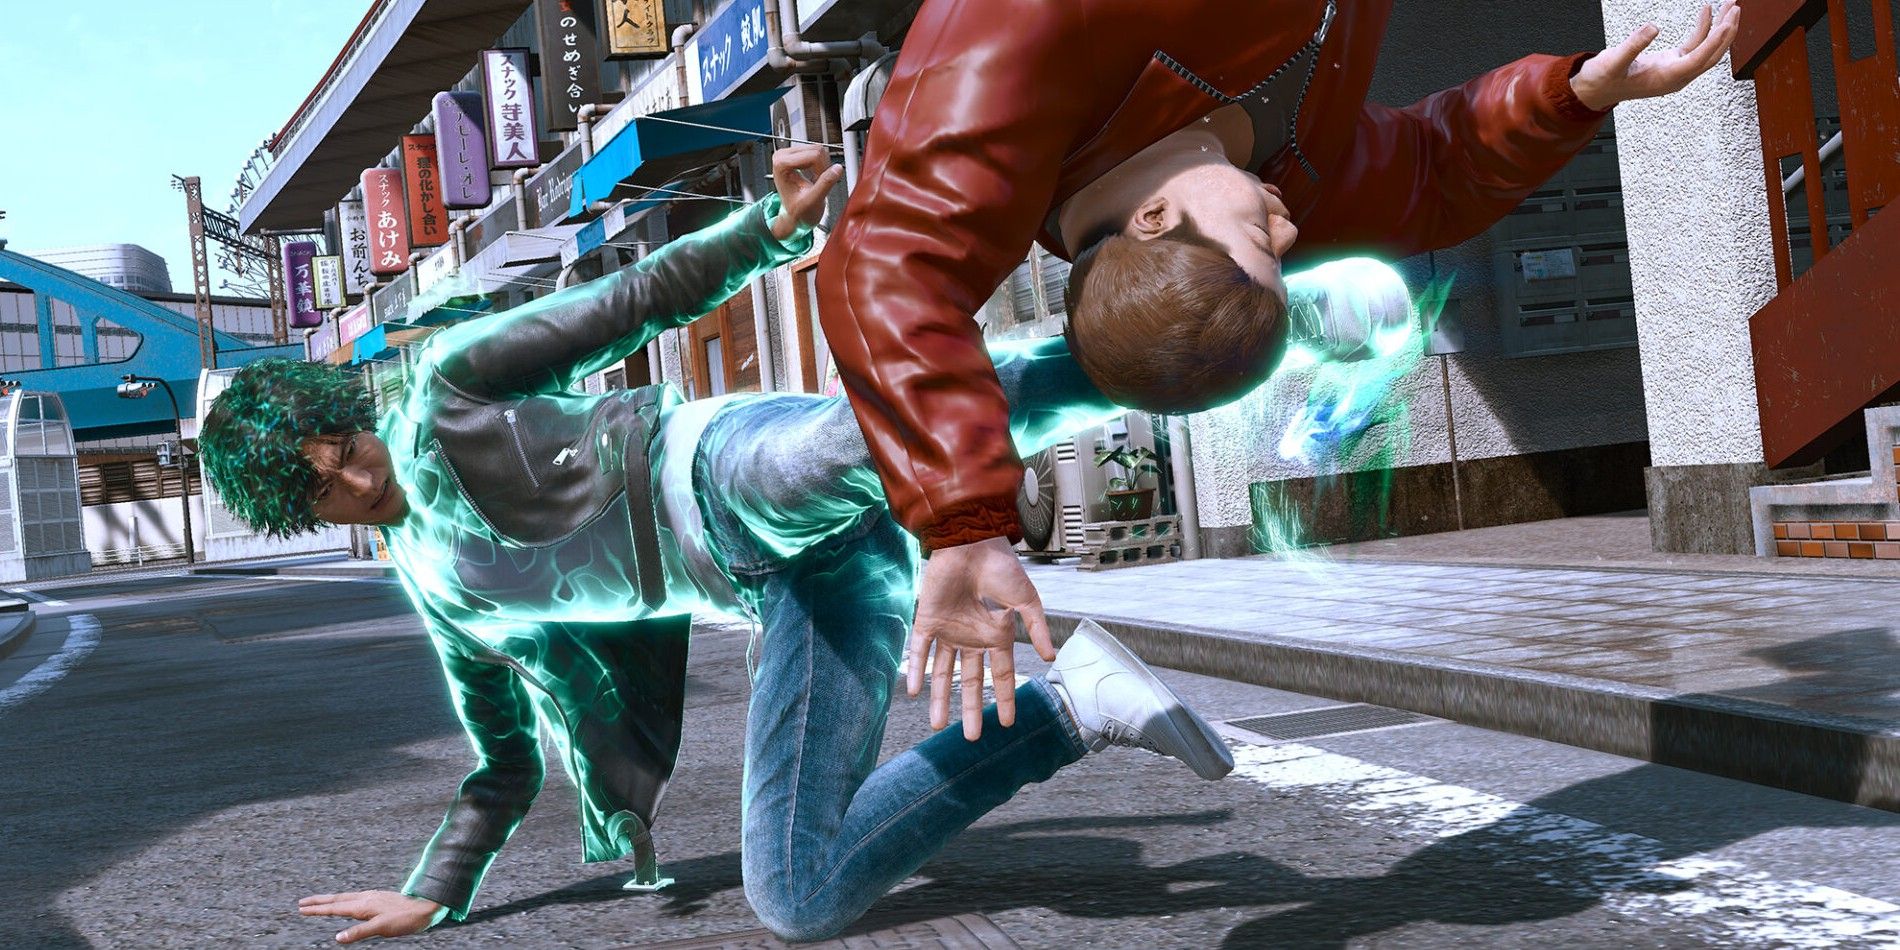 Yagami kicks an enemy in Lost Judgment.